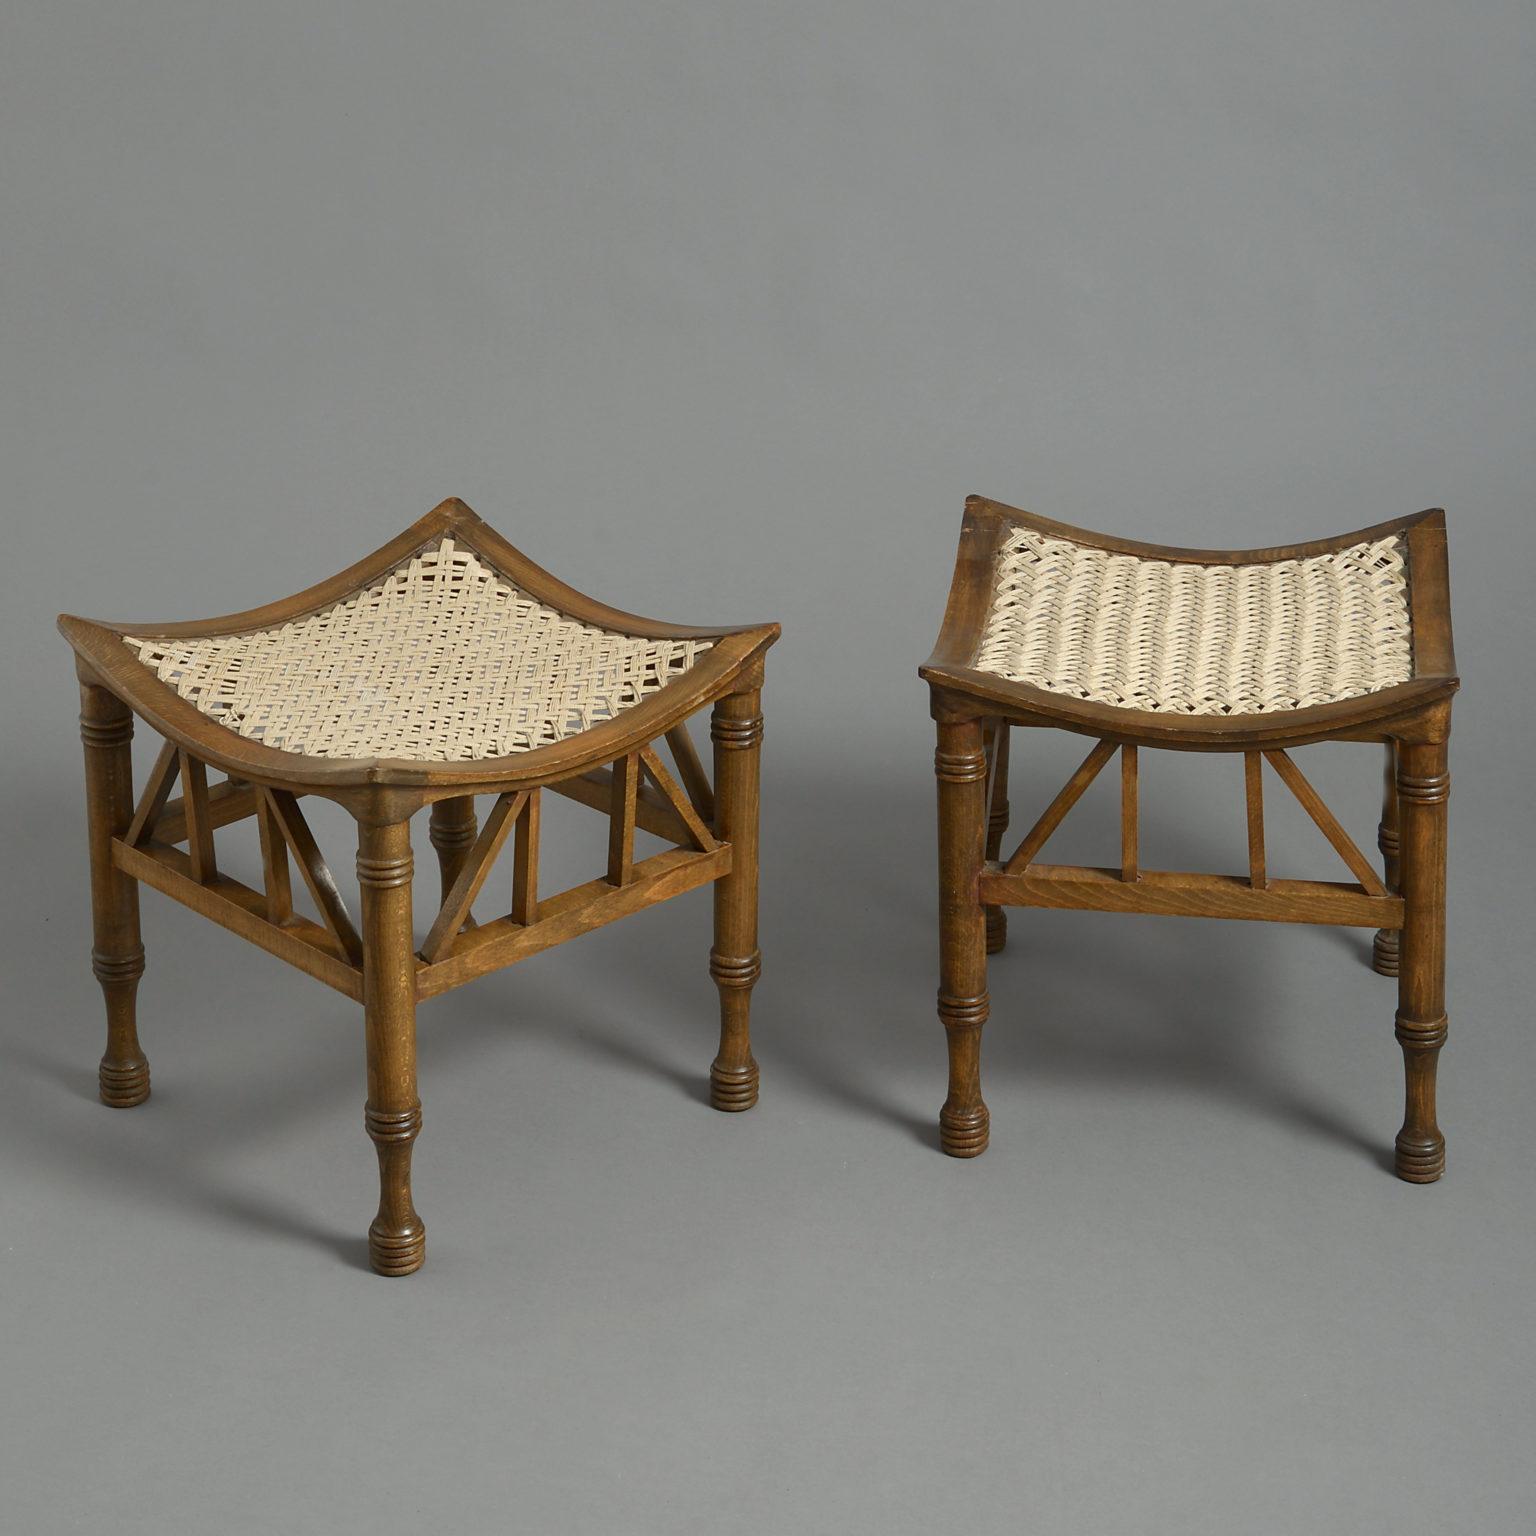 Four early 20th century Thebes stools, attributed to Liberty & Co, each having turned legs between strutted friezes, all supporting concave rope work seats.

These stools are attributed to Liberty & Co. Liberty’s patented the Thebes stool design